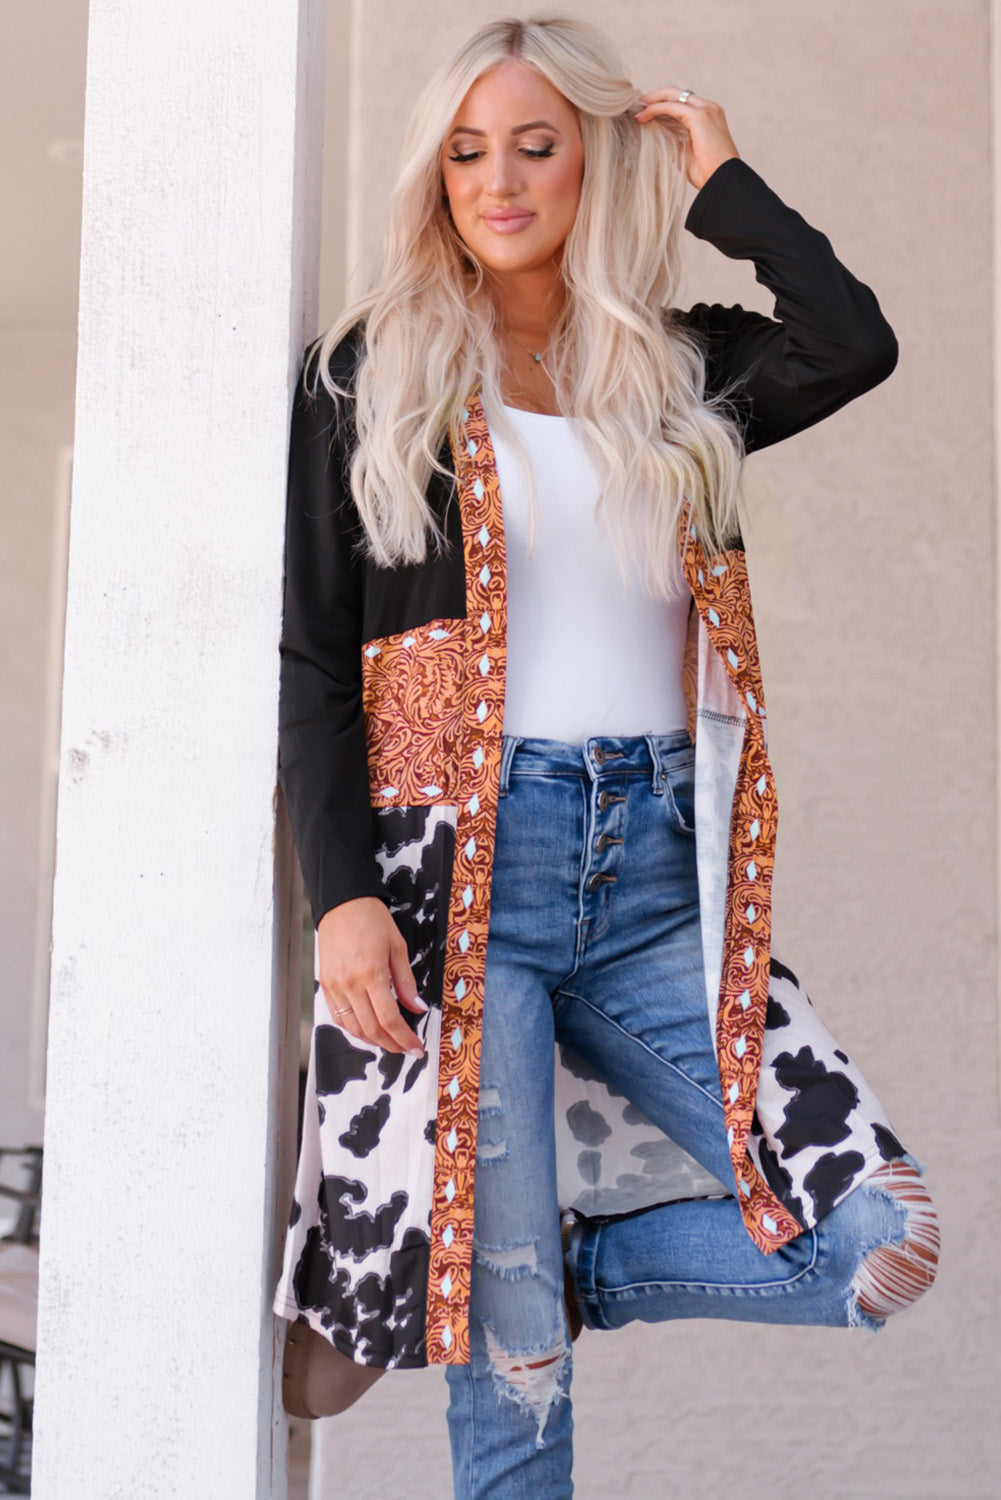 Pink Western Pattern Cow Patchwork Open Front Cardigan